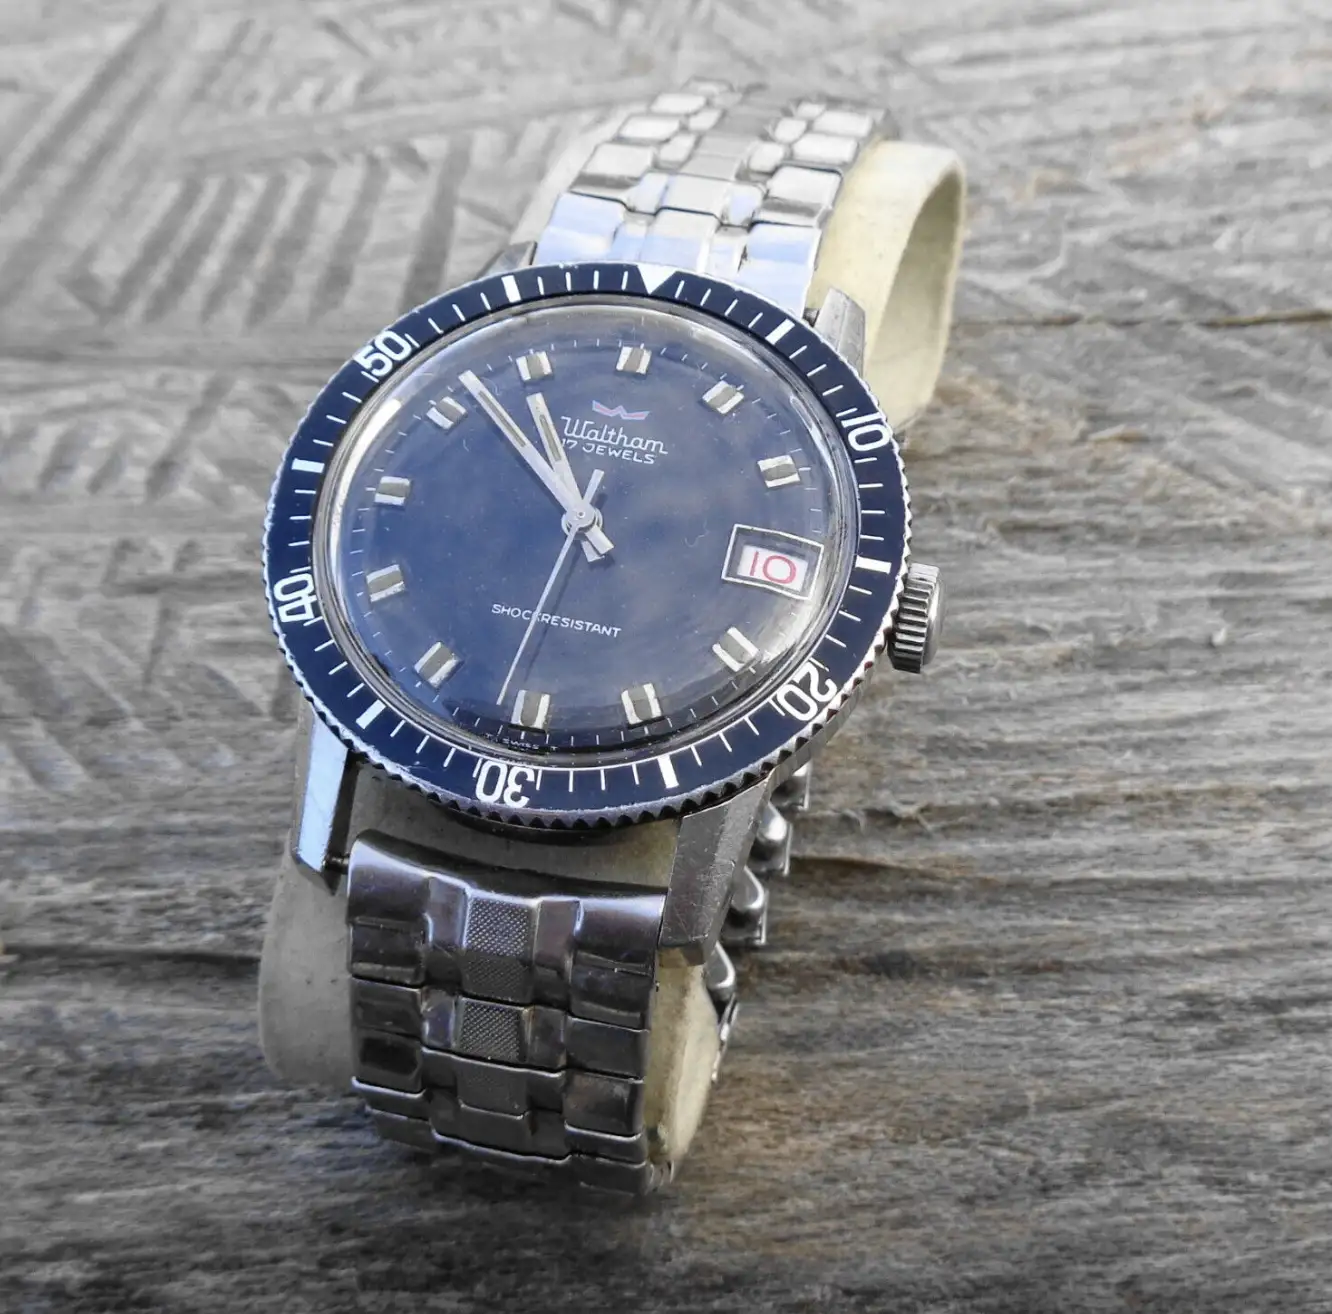 eBay Finds: A Jumbo Sparkle Seamaster, Vintage Formal Wear, and a UFO